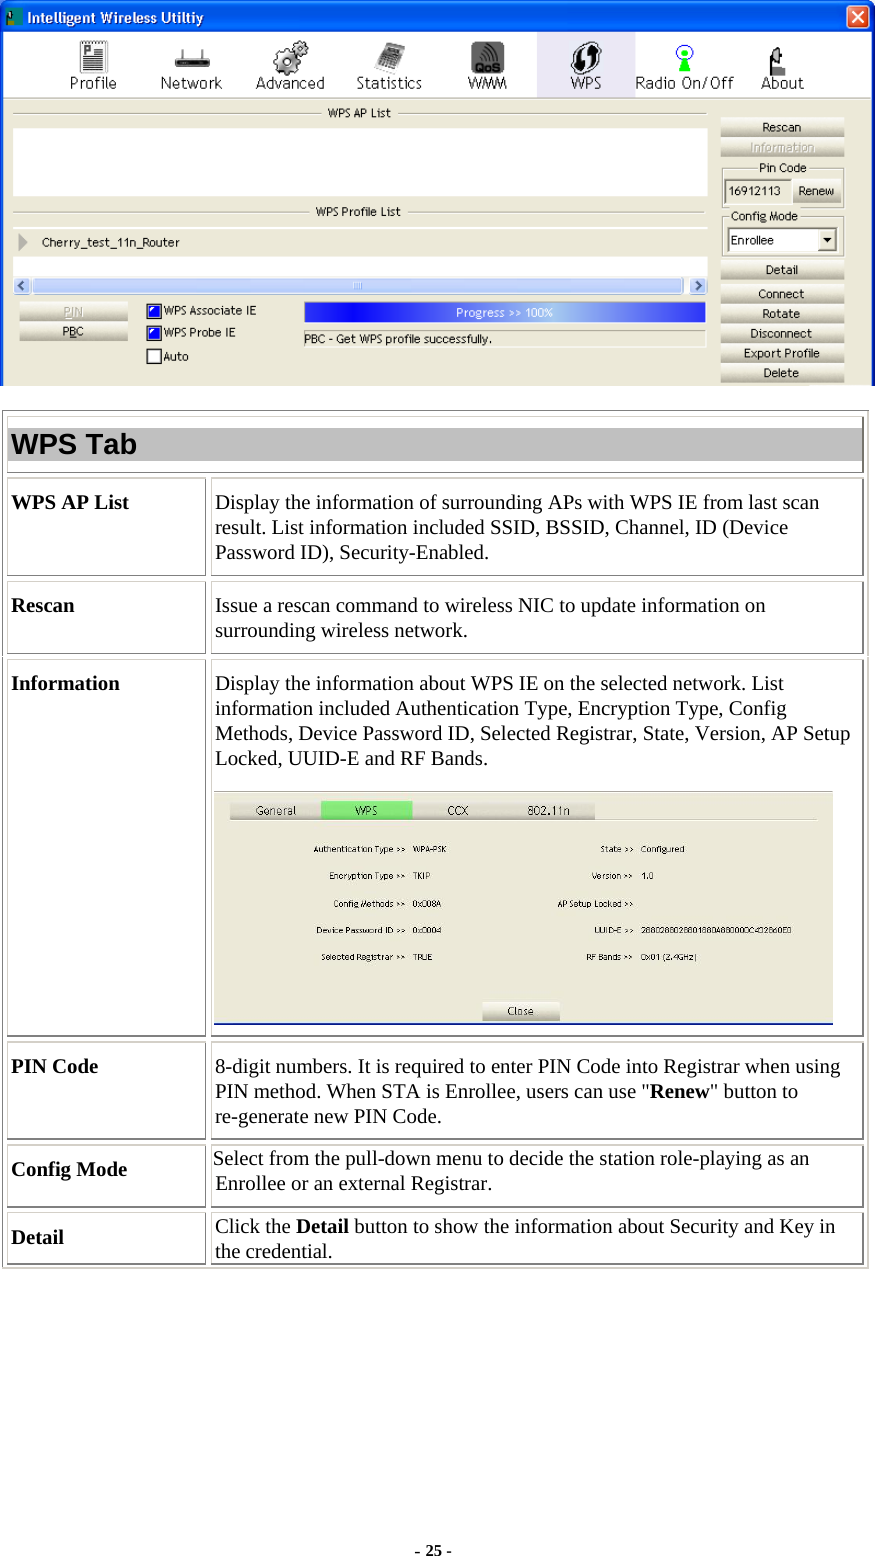  - 25 -  WPS Tab WPS AP List  Display the information of surrounding APs with WPS IE from last scan result. List information included SSID, BSSID, Channel, ID (Device Password ID), Security-Enabled. Rescan  Issue a rescan command to wireless NIC to update information on surrounding wireless network. Information  Display the information about WPS IE on the selected network. List information included Authentication Type, Encryption Type, Config Methods, Device Password ID, Selected Registrar, State, Version, AP Setup Locked, UUID-E and RF Bands.  PIN Code  8-digit numbers. It is required to enter PIN Code into Registrar when using PIN method. When STA is Enrollee, users can use &quot;Renew&quot; button to re-generate new PIN Code. Config Mode  Select from the pull-down menu to decide the station role-playing as an Enrollee or an external Registrar. Detail  Click the Detail button to show the information about Security and Key in the credential. 